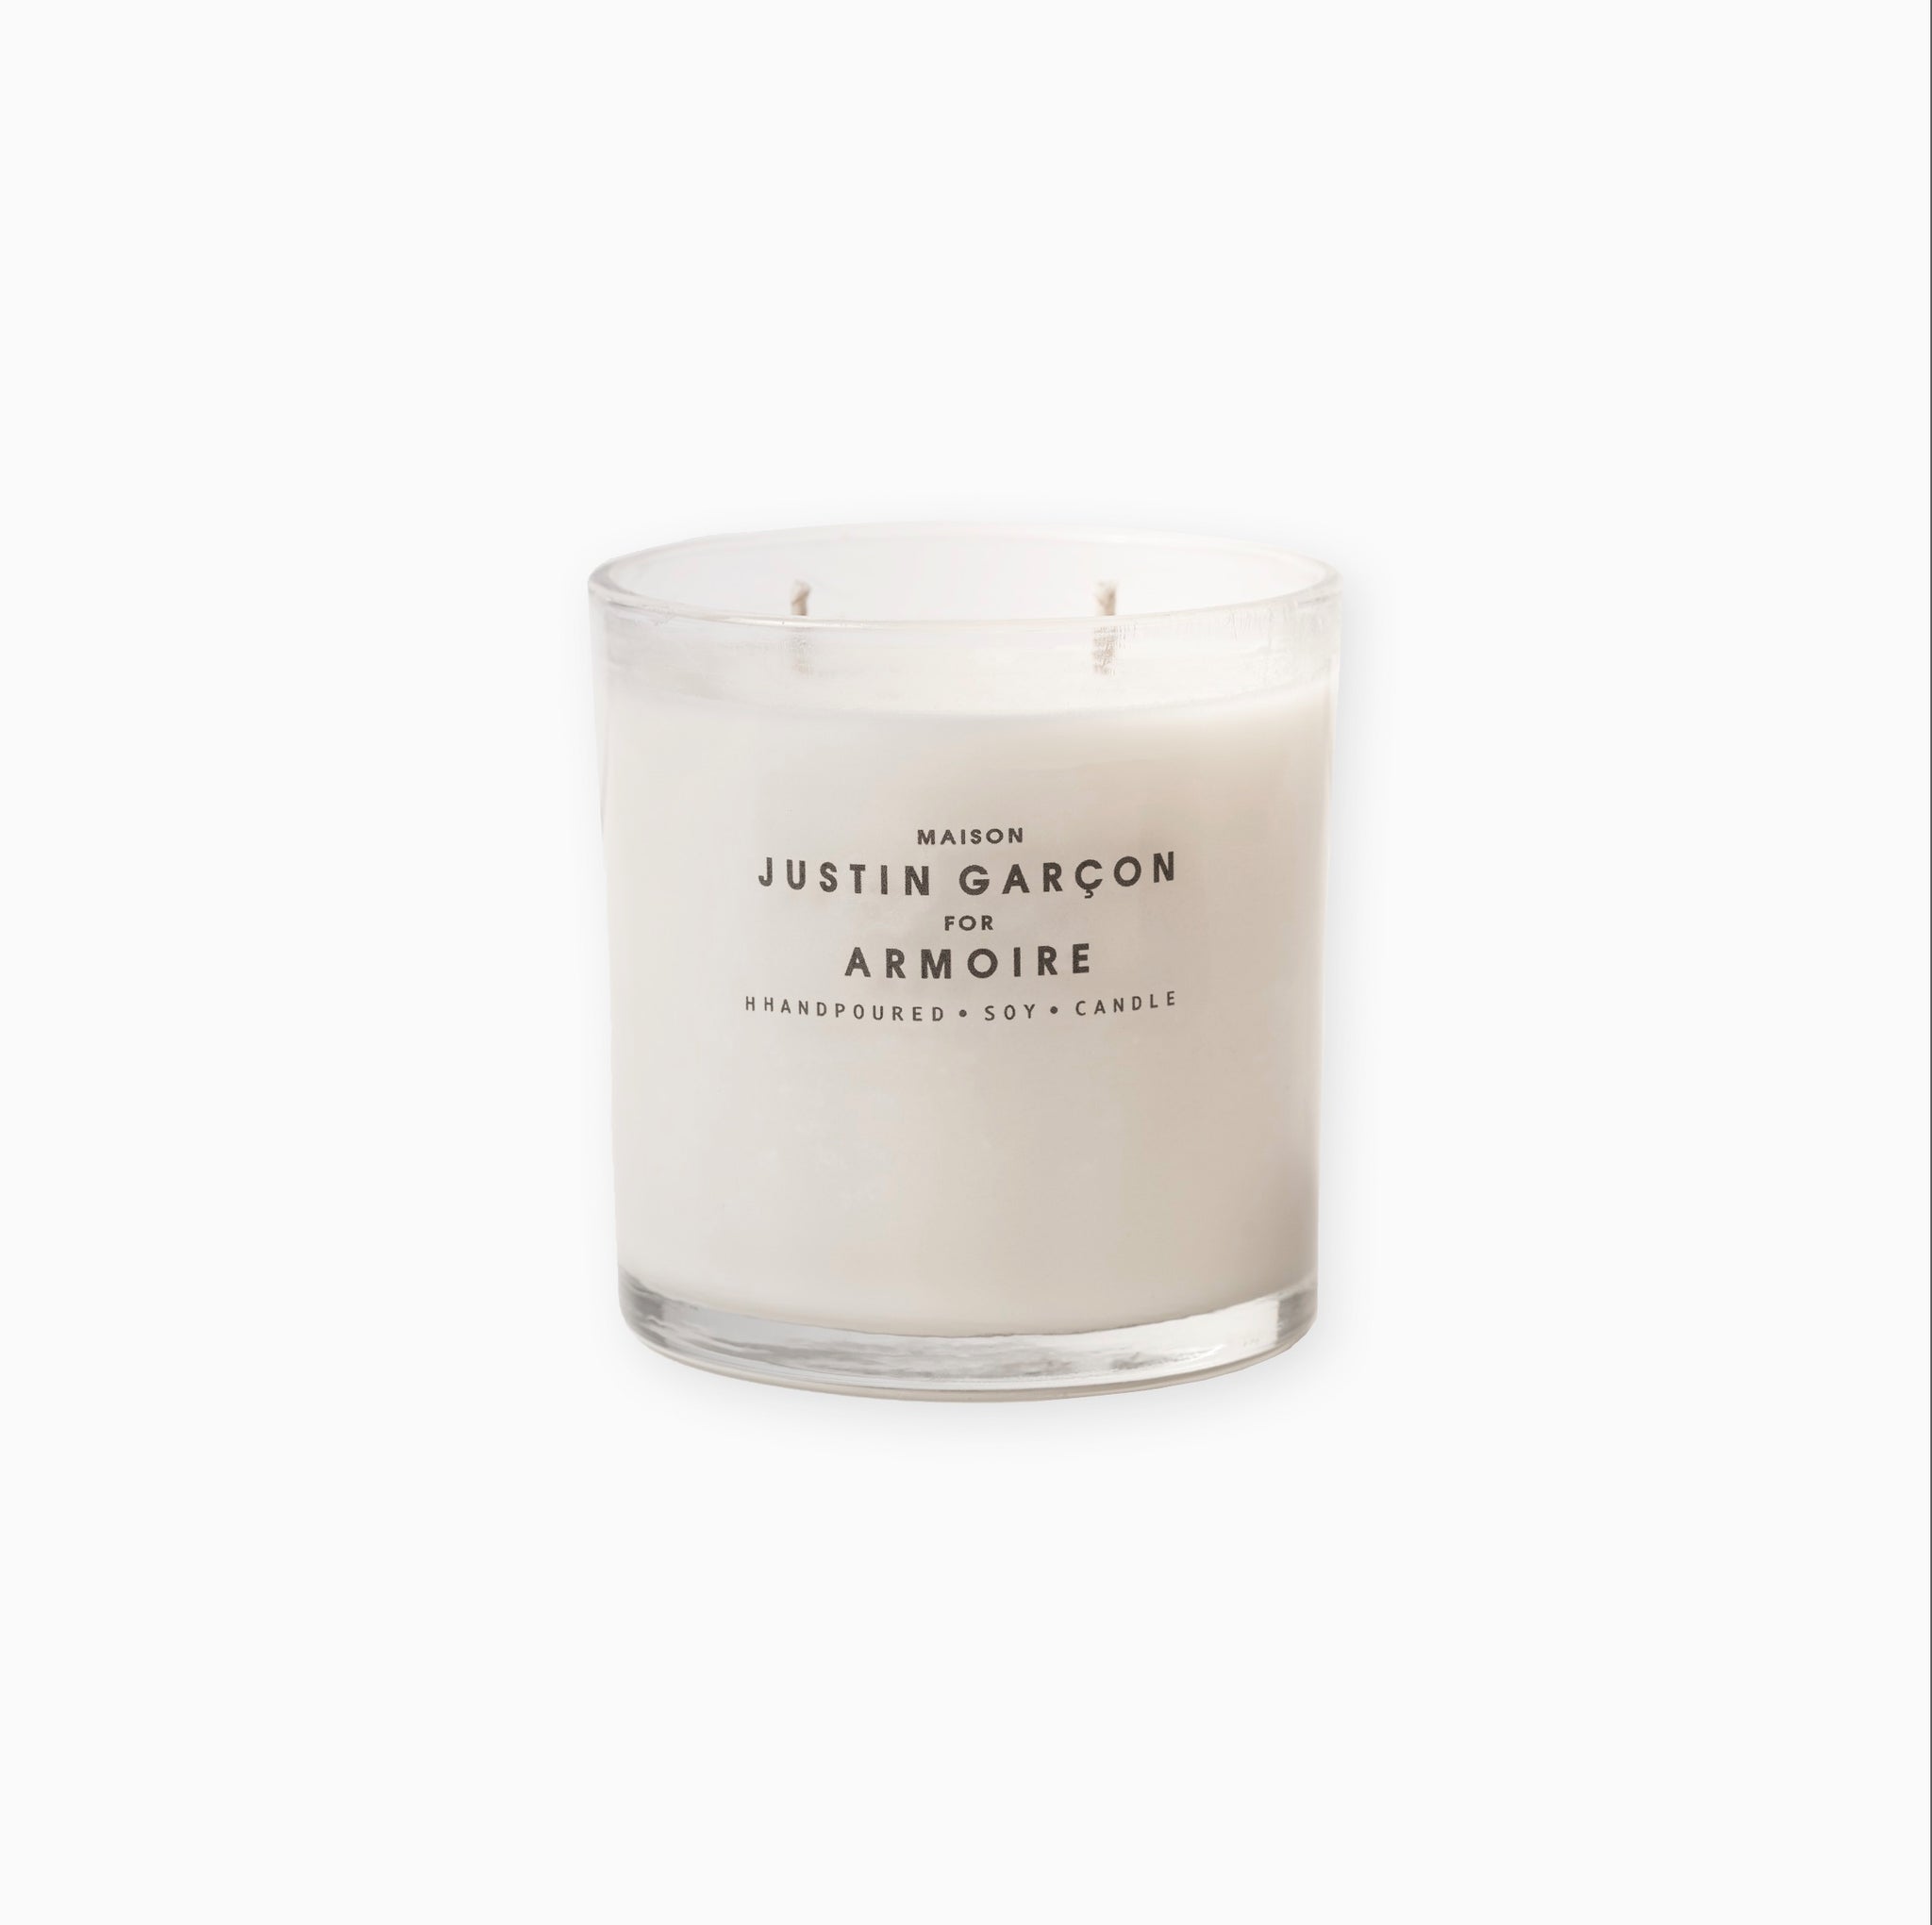 ARMOIRE "SCENTS THAT TRAVEL" Candle.